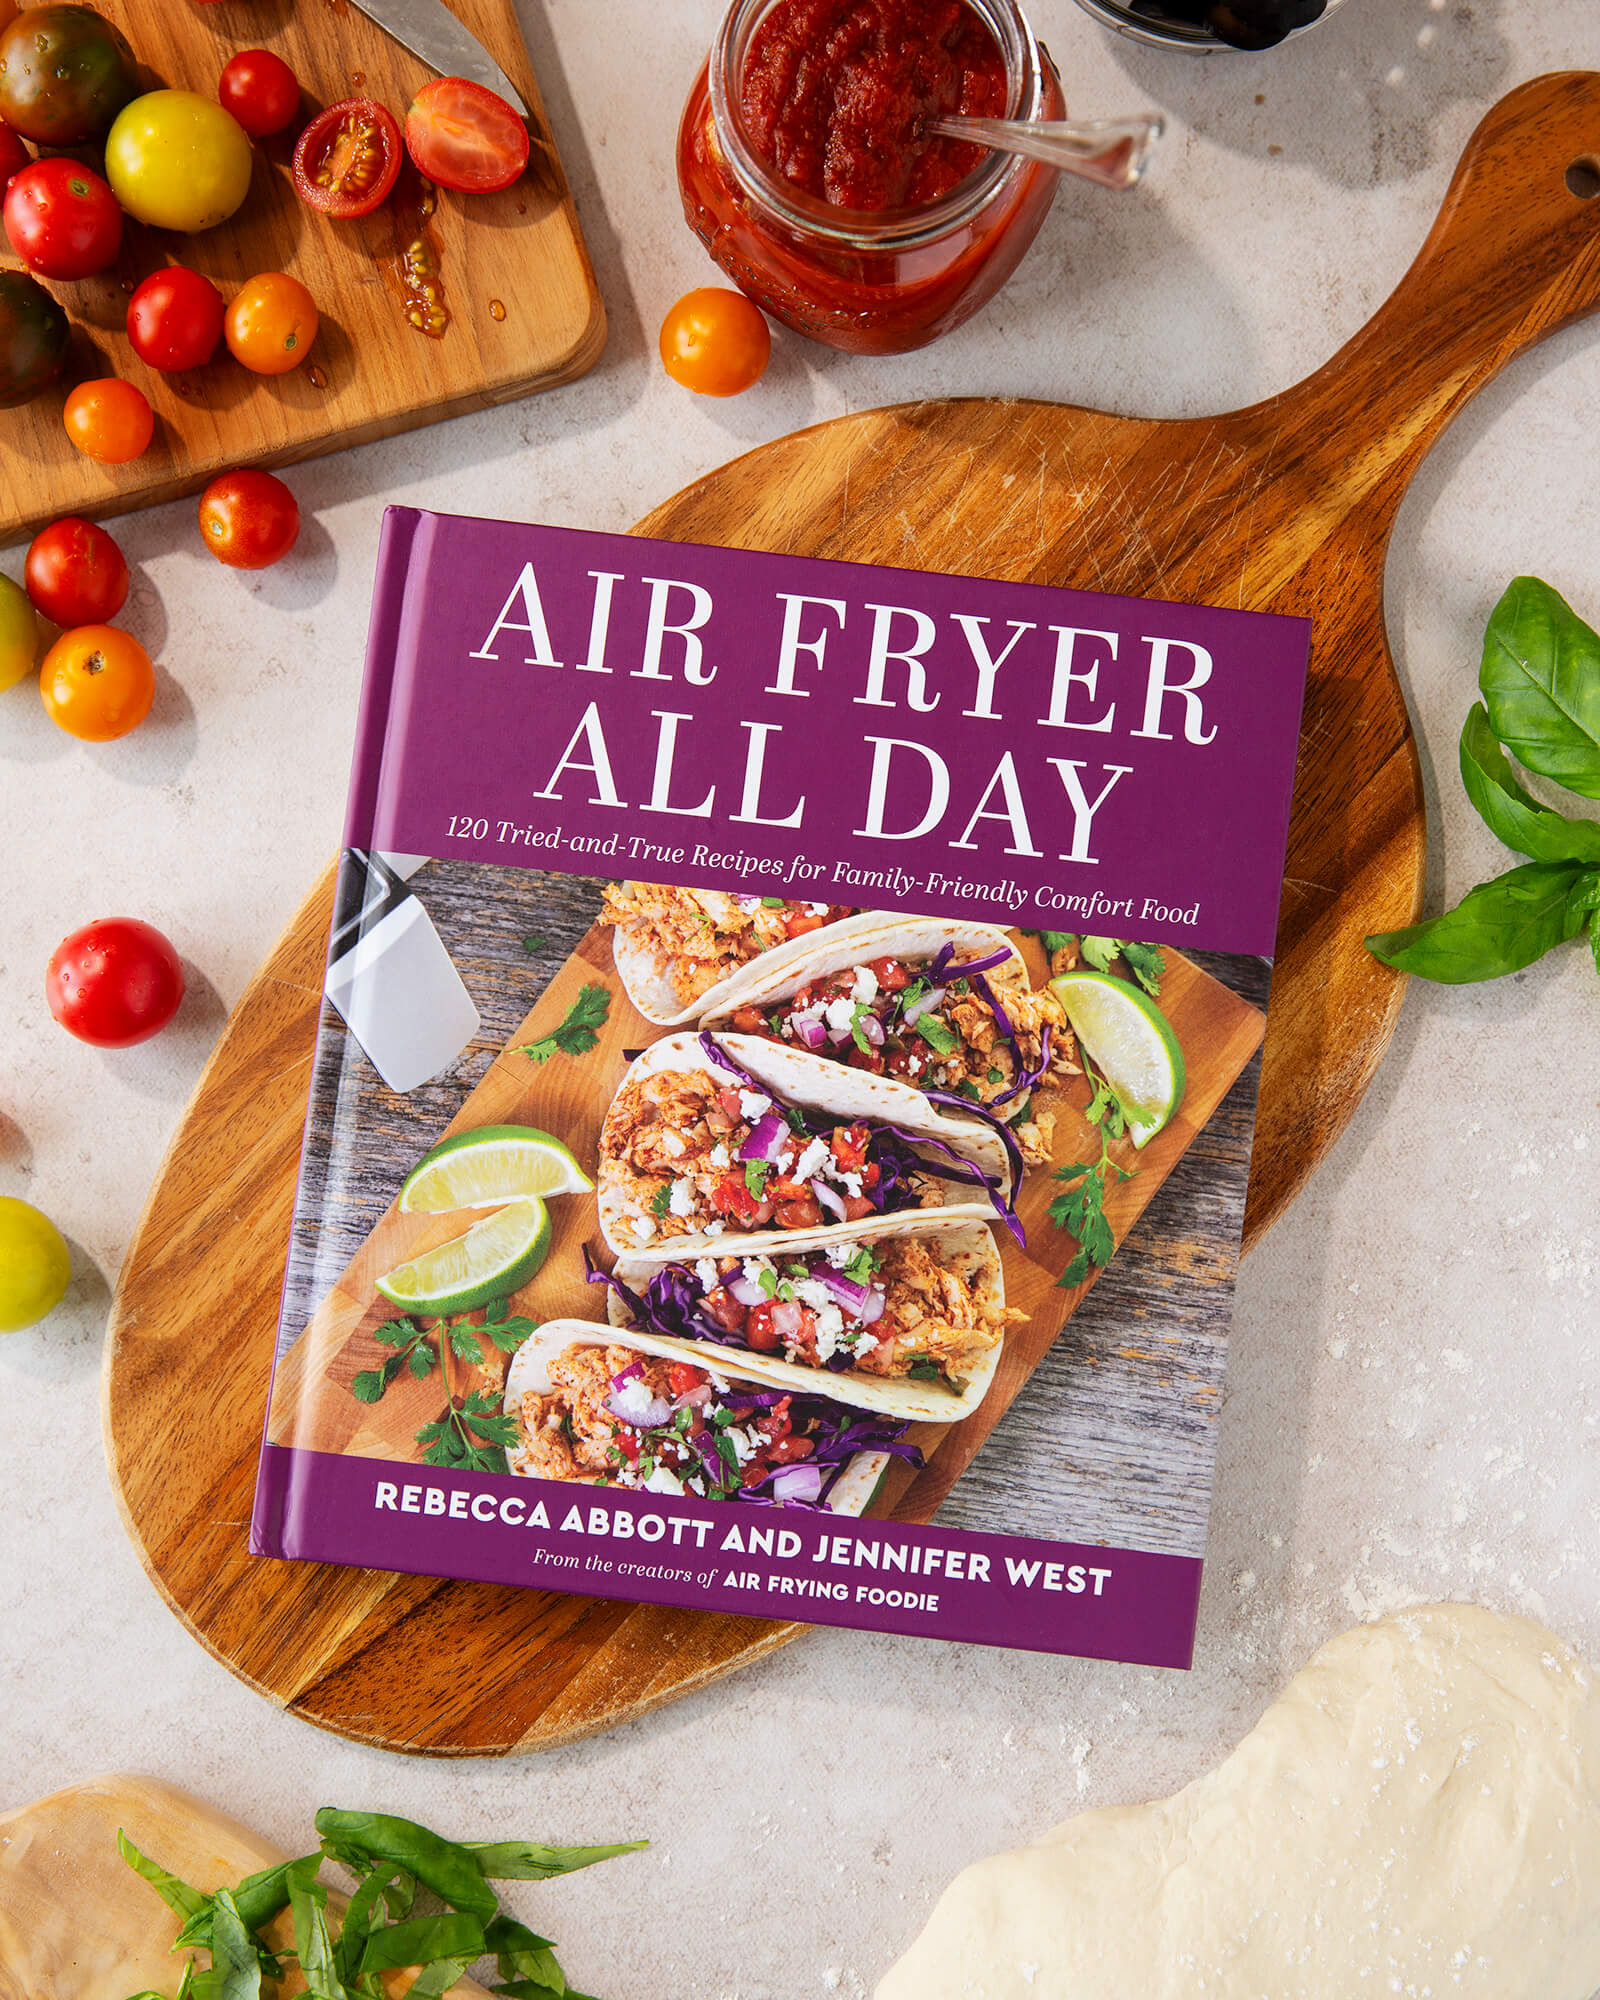 Photo of the air fryer all day cookbook on a cutting board with food surrounding it on a table.